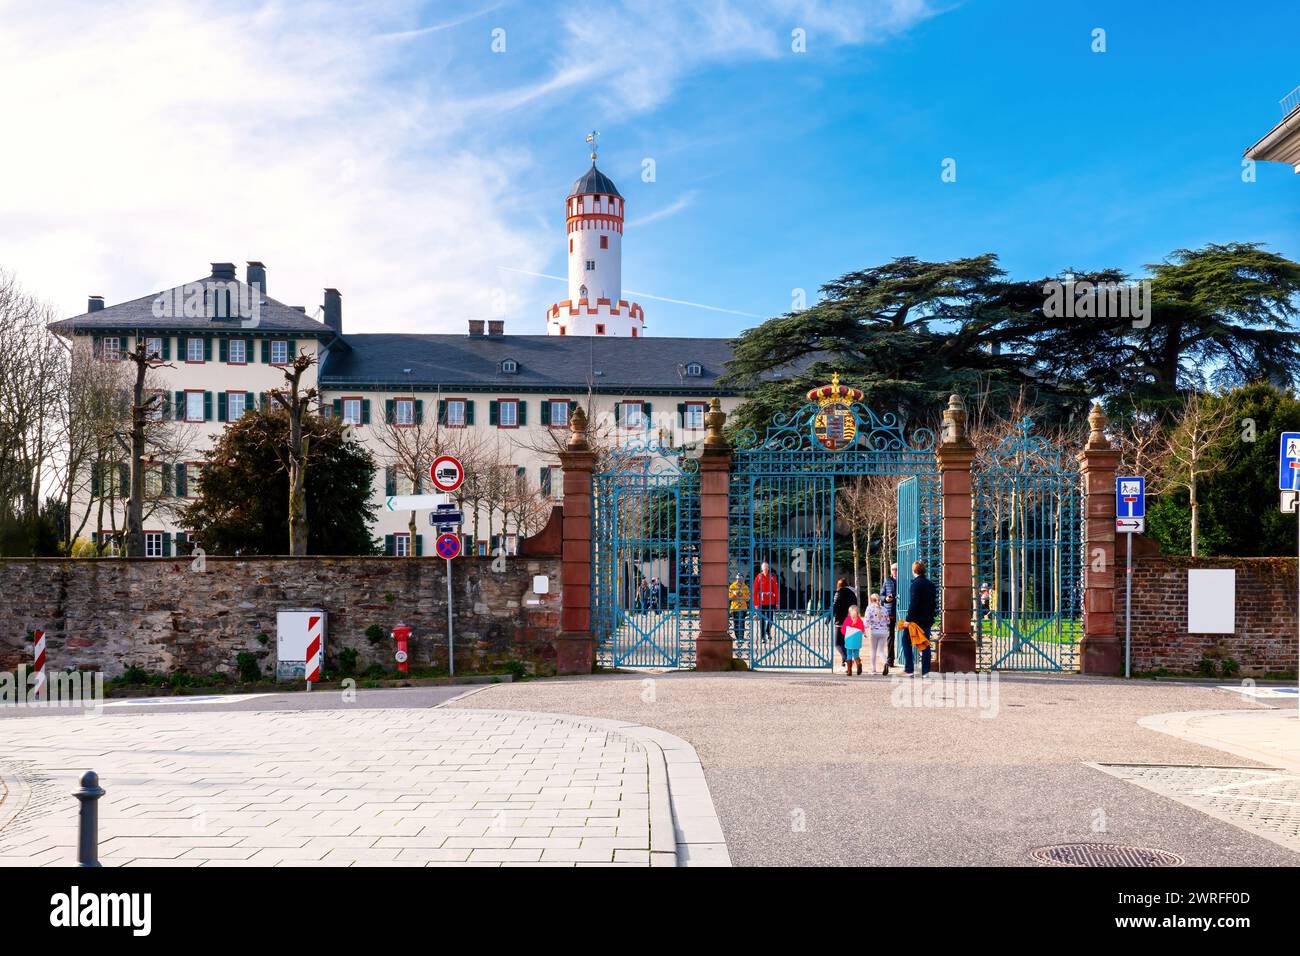 View of the entrance to Bad Homburg Castle, Hesse, Germany Stock Photo